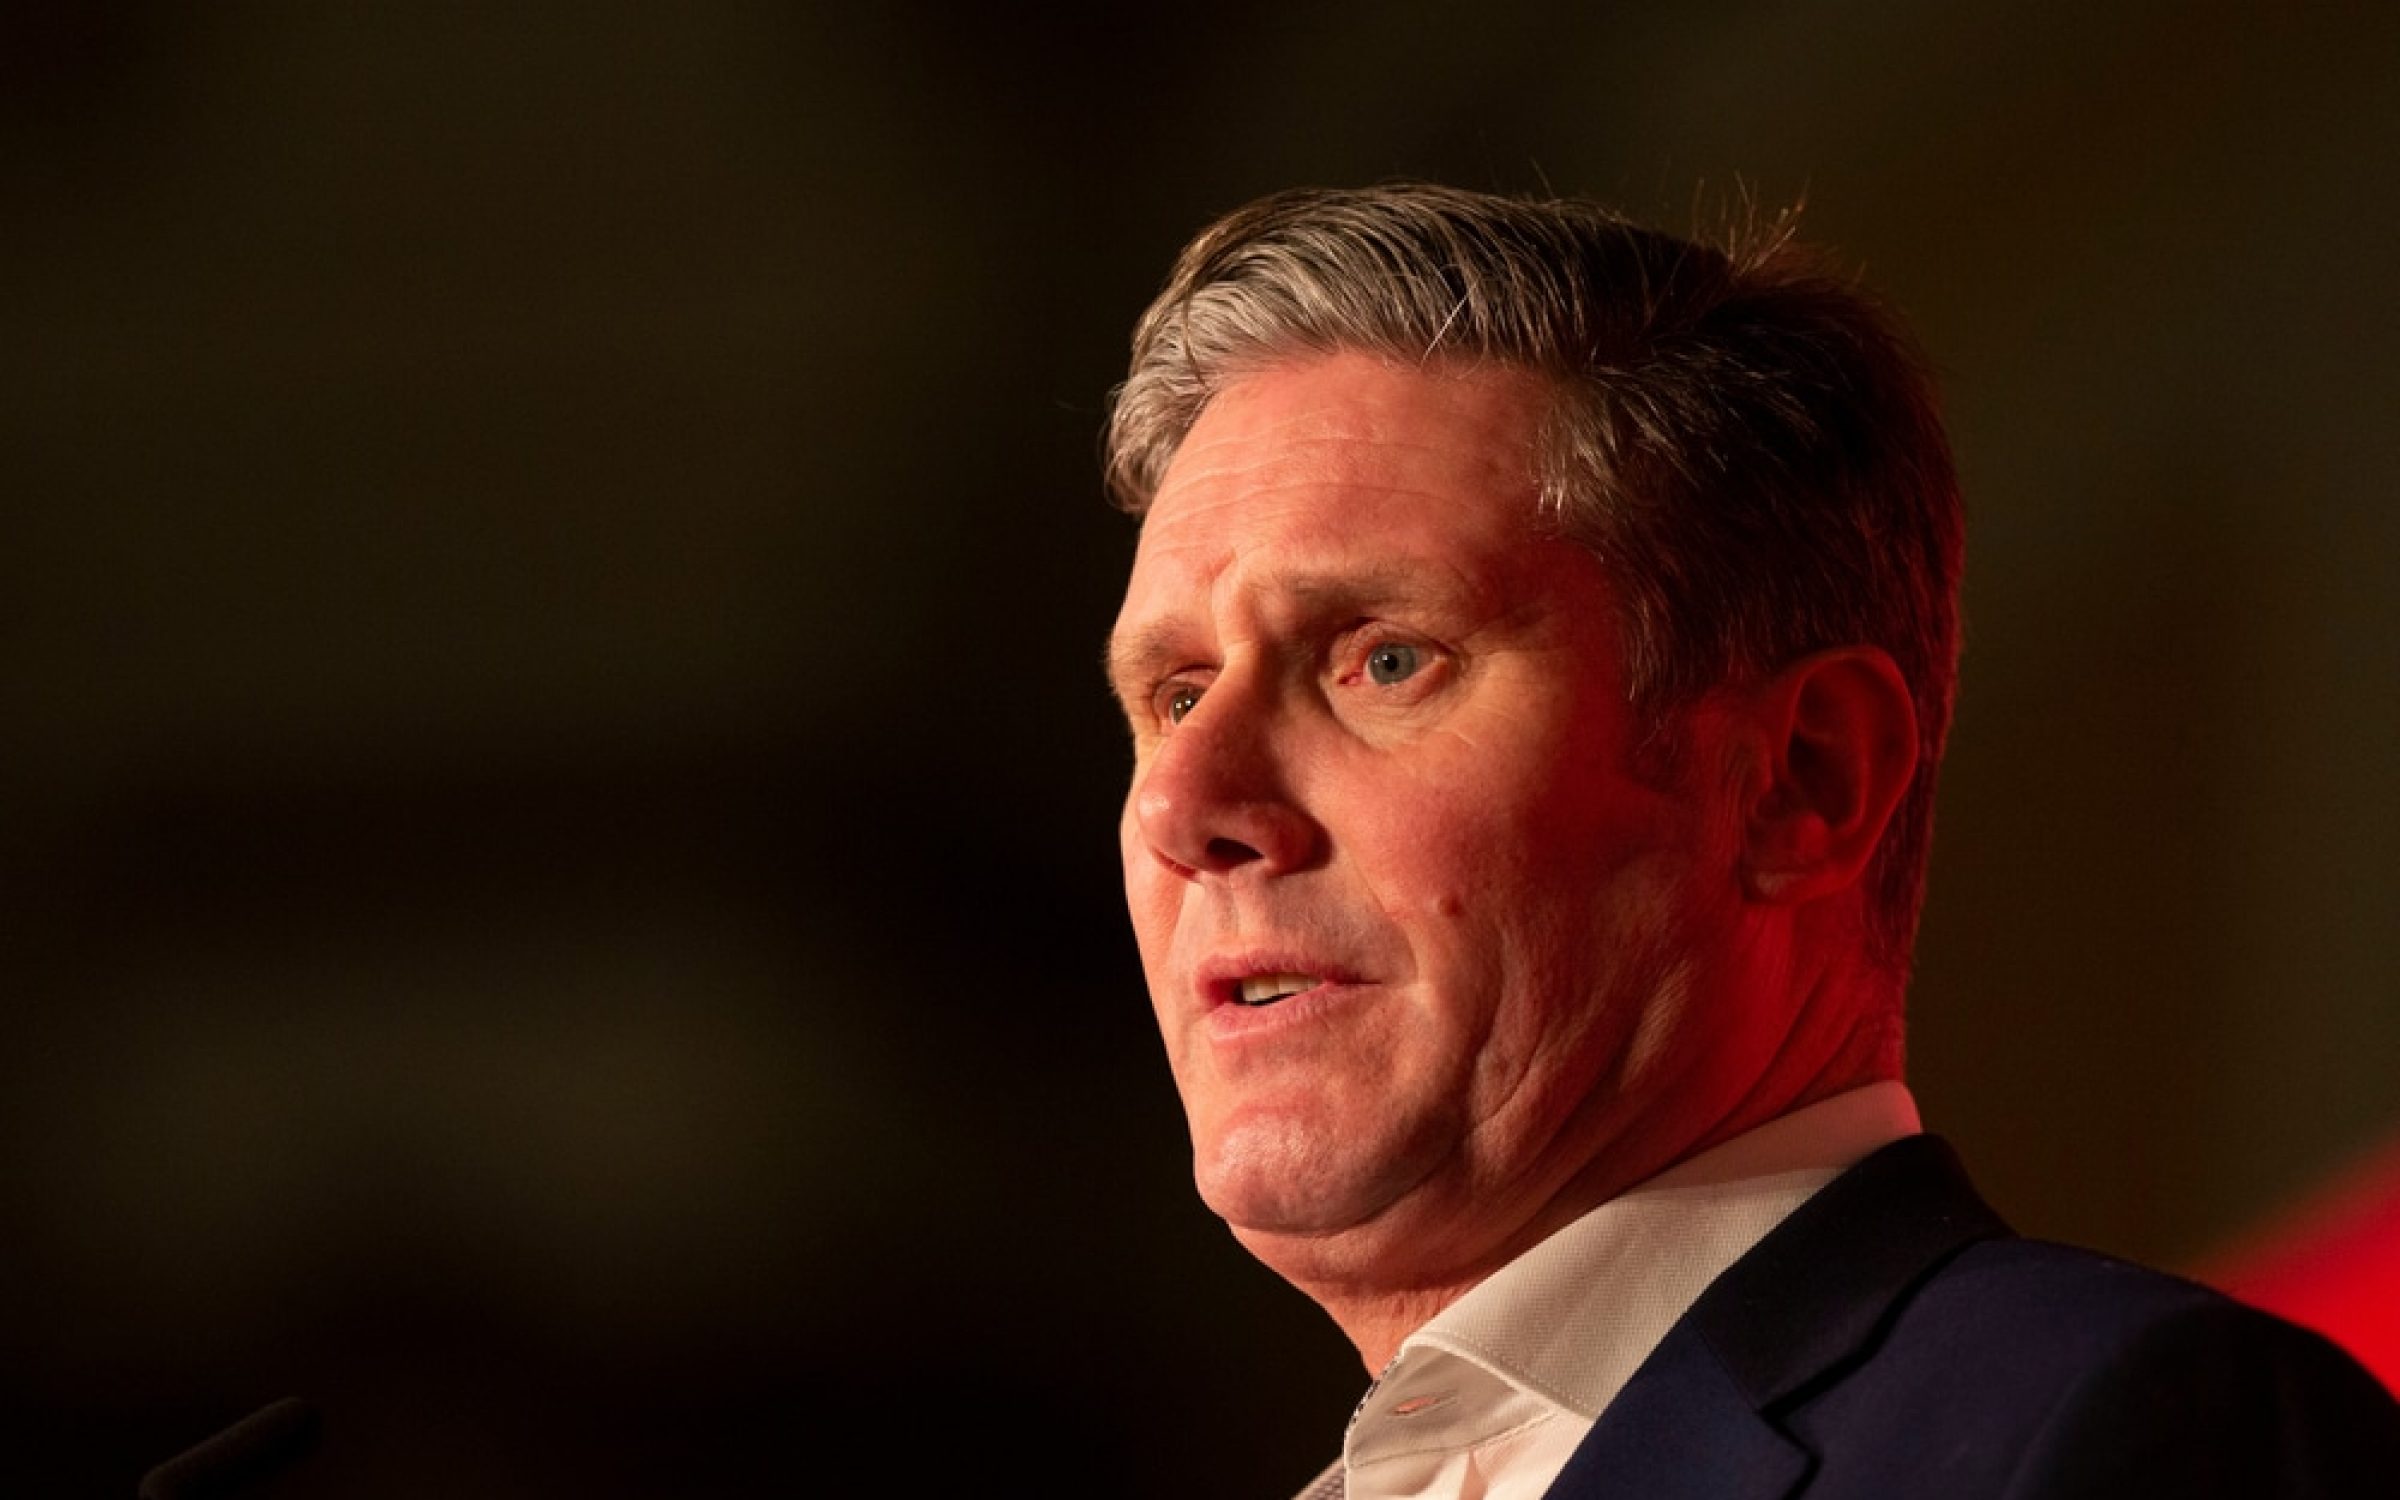 Keir Starmer, who proposed price controls to solve energy crisis